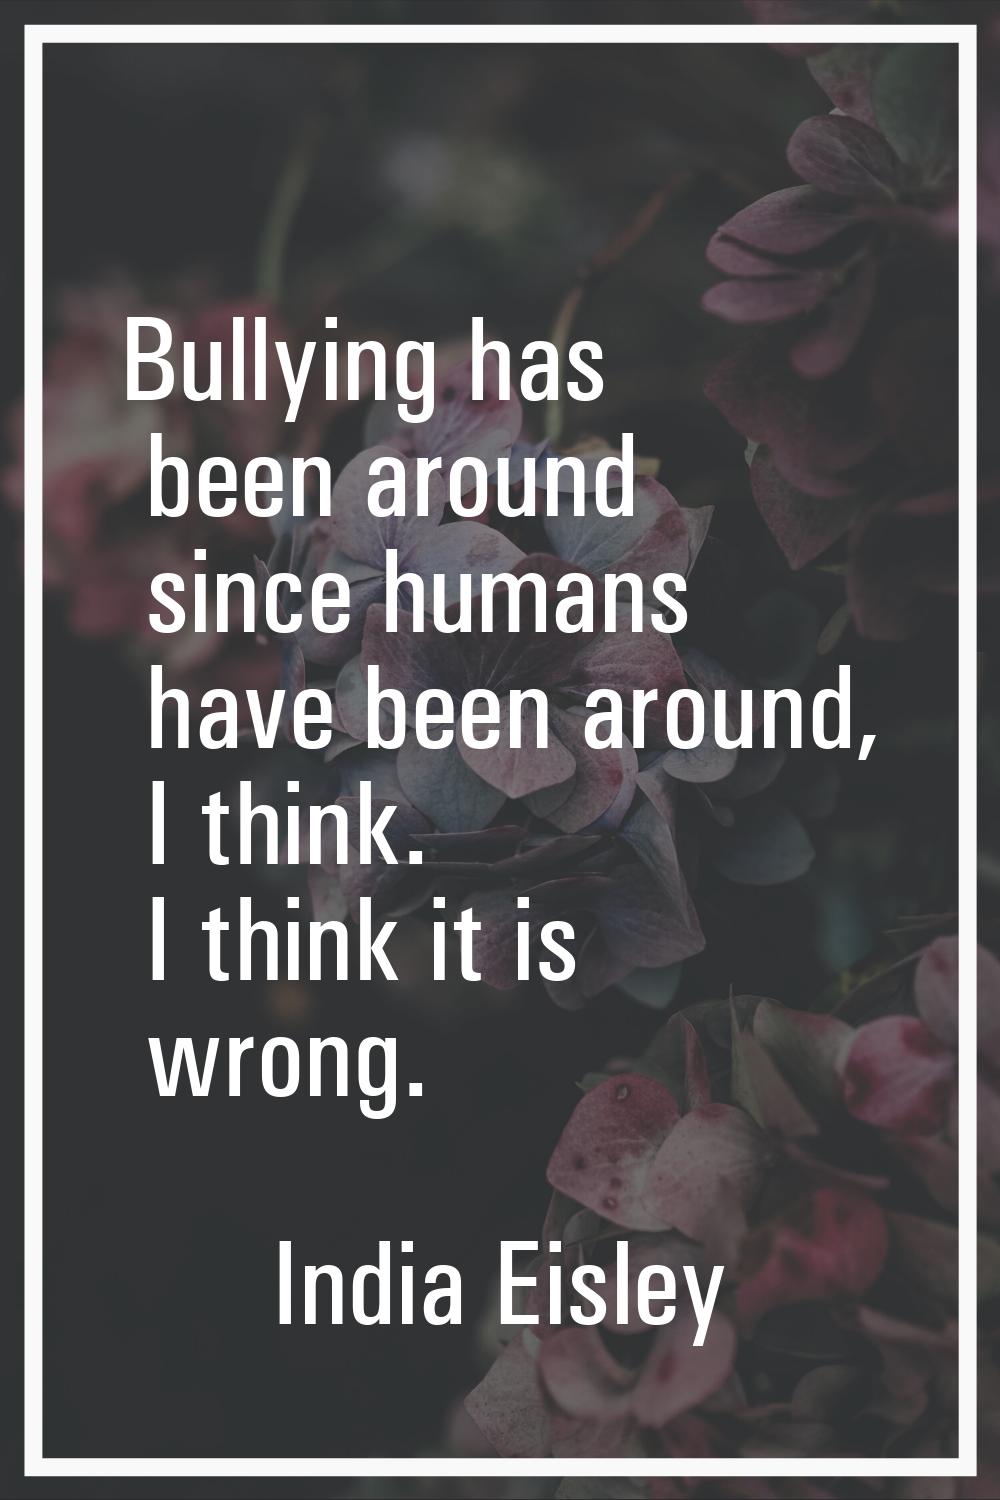 Bullying has been around since humans have been around, I think. I think it is wrong.